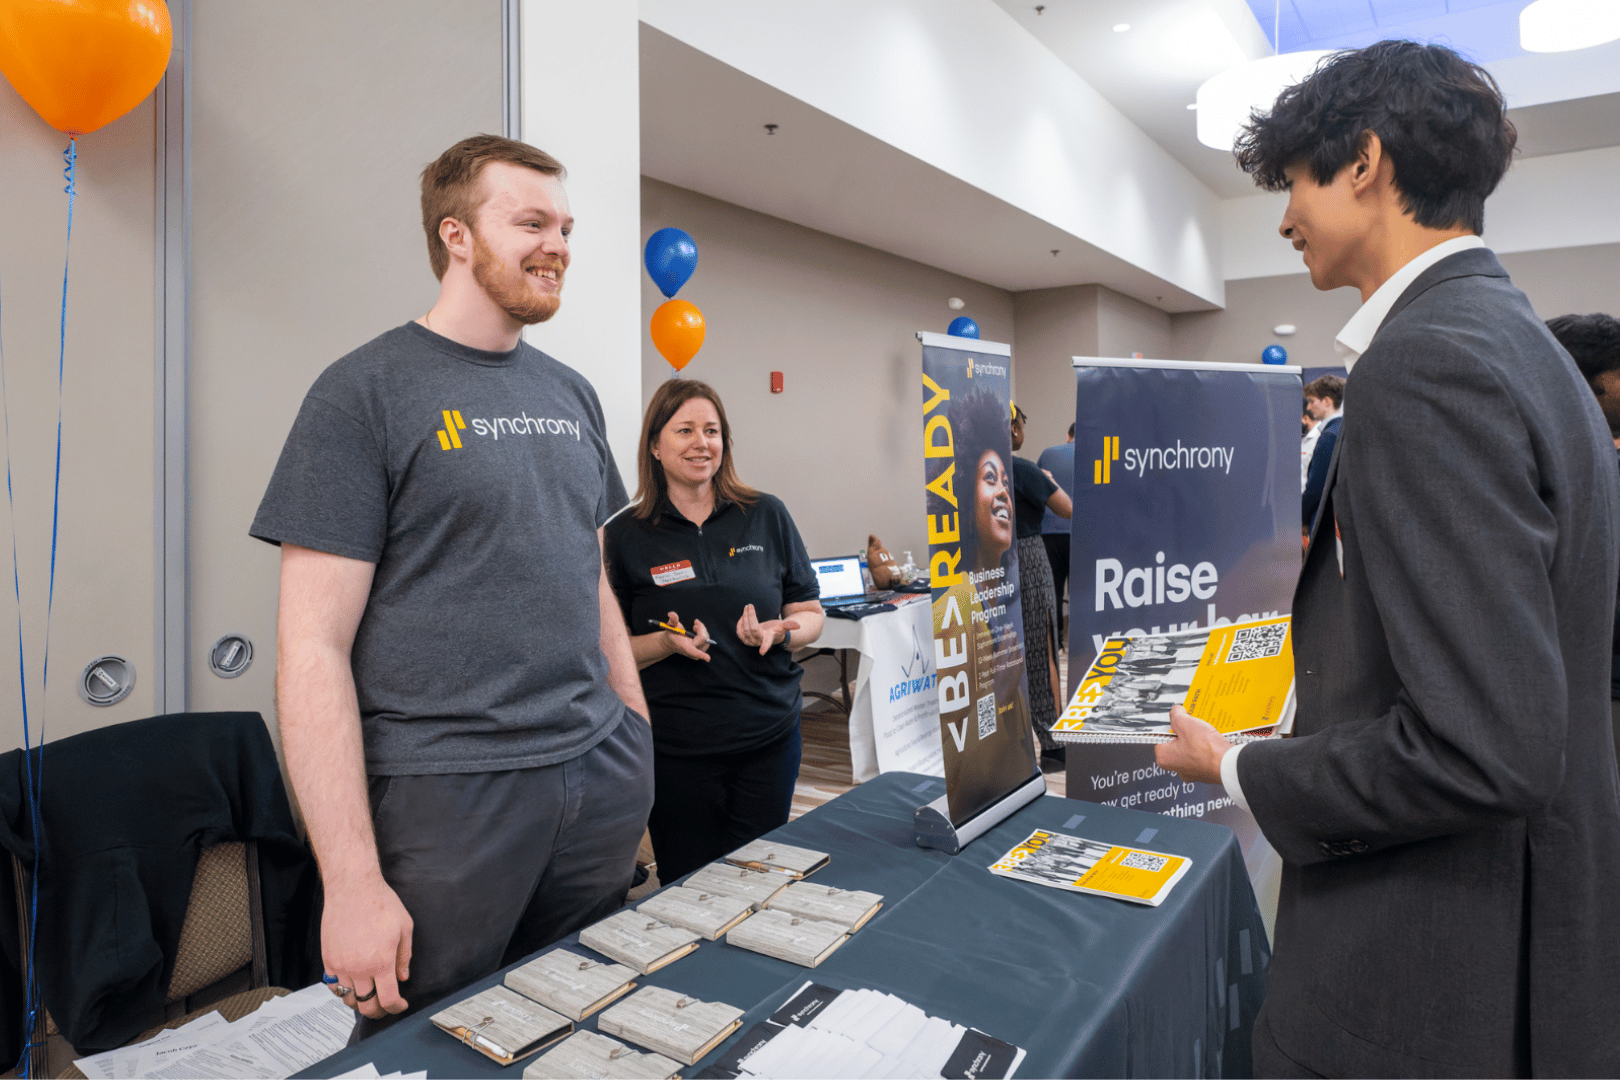 Recruiter from Synchrony and student engaging in conversation